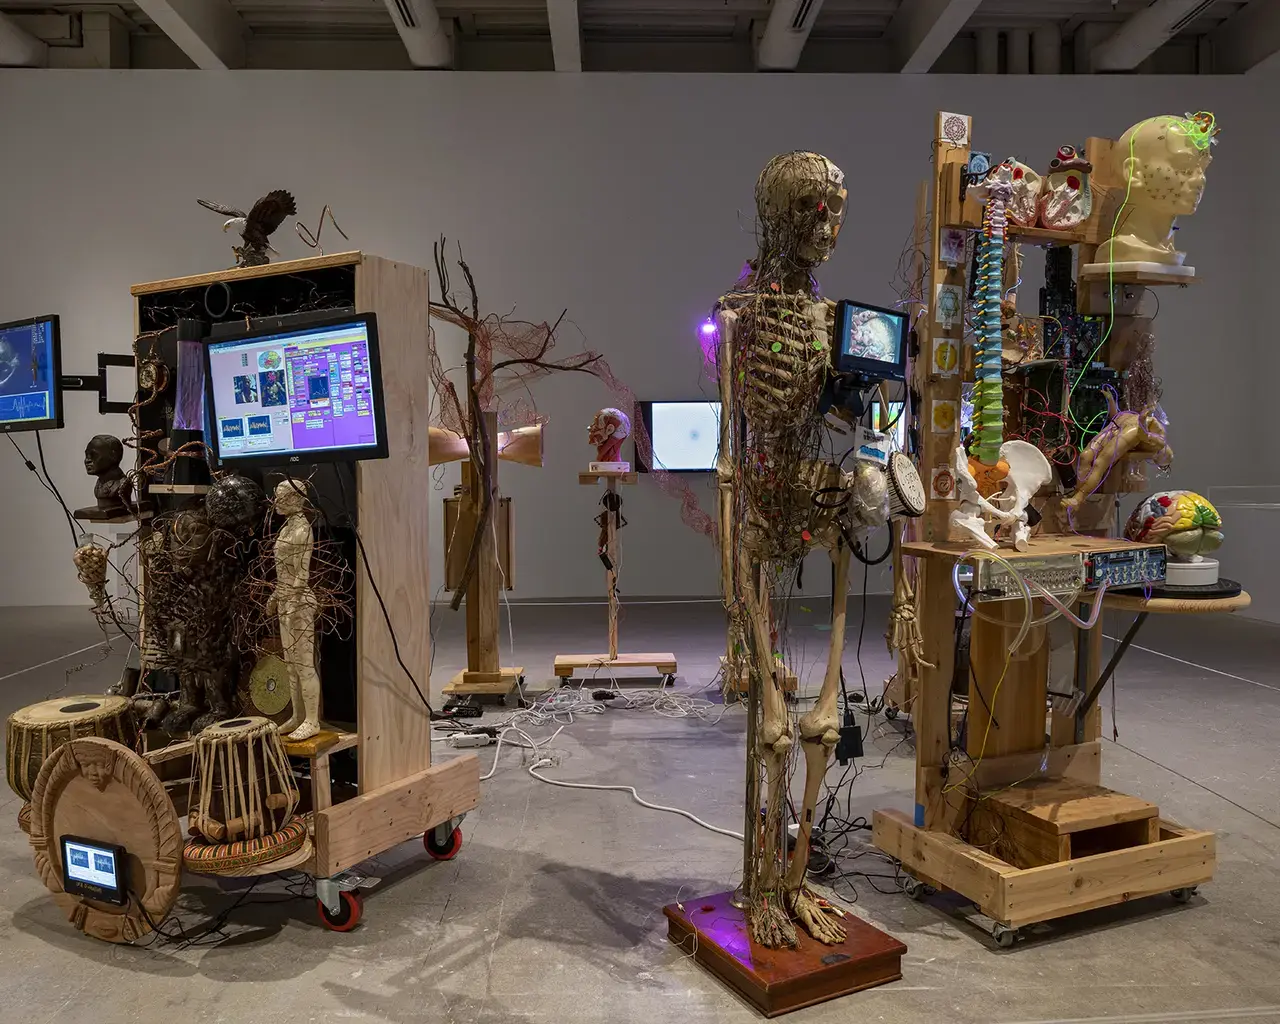 Milford Graves, Milford Graves: A Mind-Body Deal, 2020, installation view, presented by Ars Nova Workshop, Institute of Contemporary Art, University of Pennsylvania. Photo by Constance Mensh.